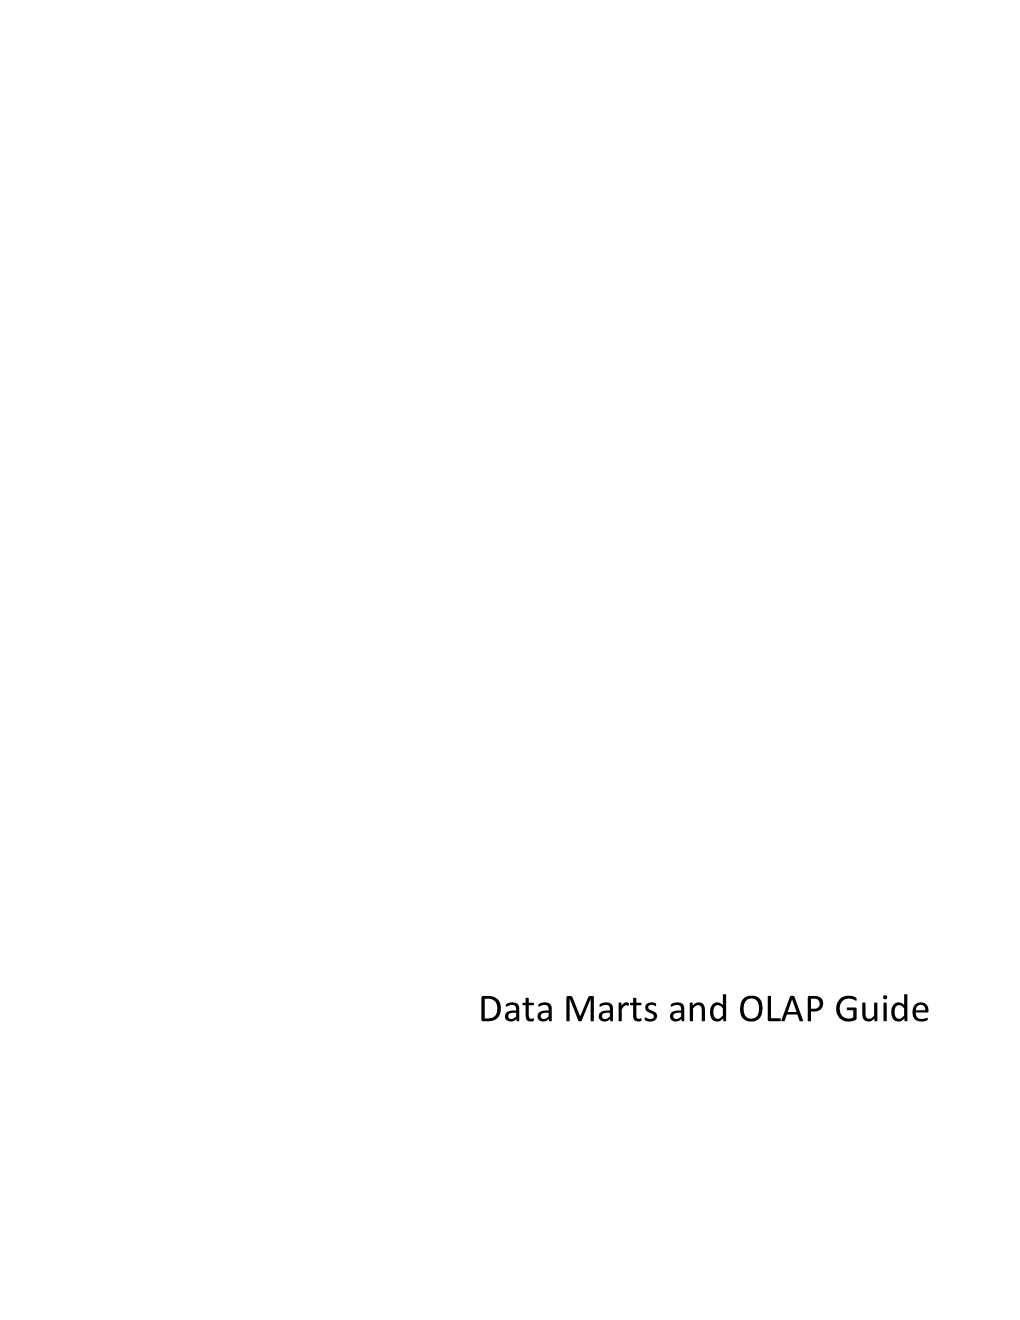 Blackbaud CRM Data Marts and OLAP Guide